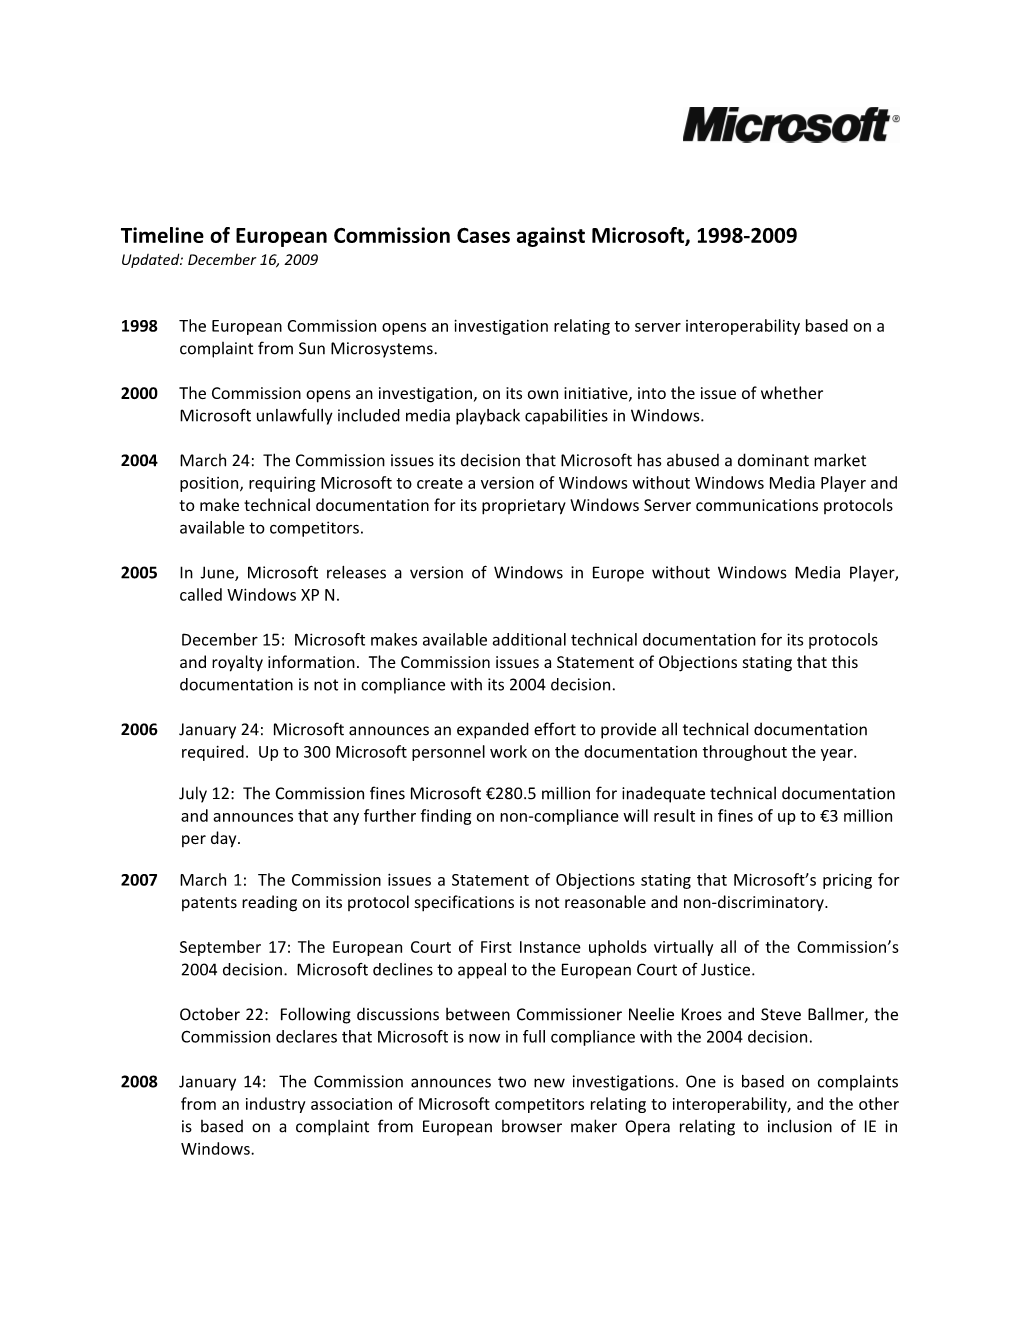 Timeline of European Commission Cases Against Microsoft, 1998-2009